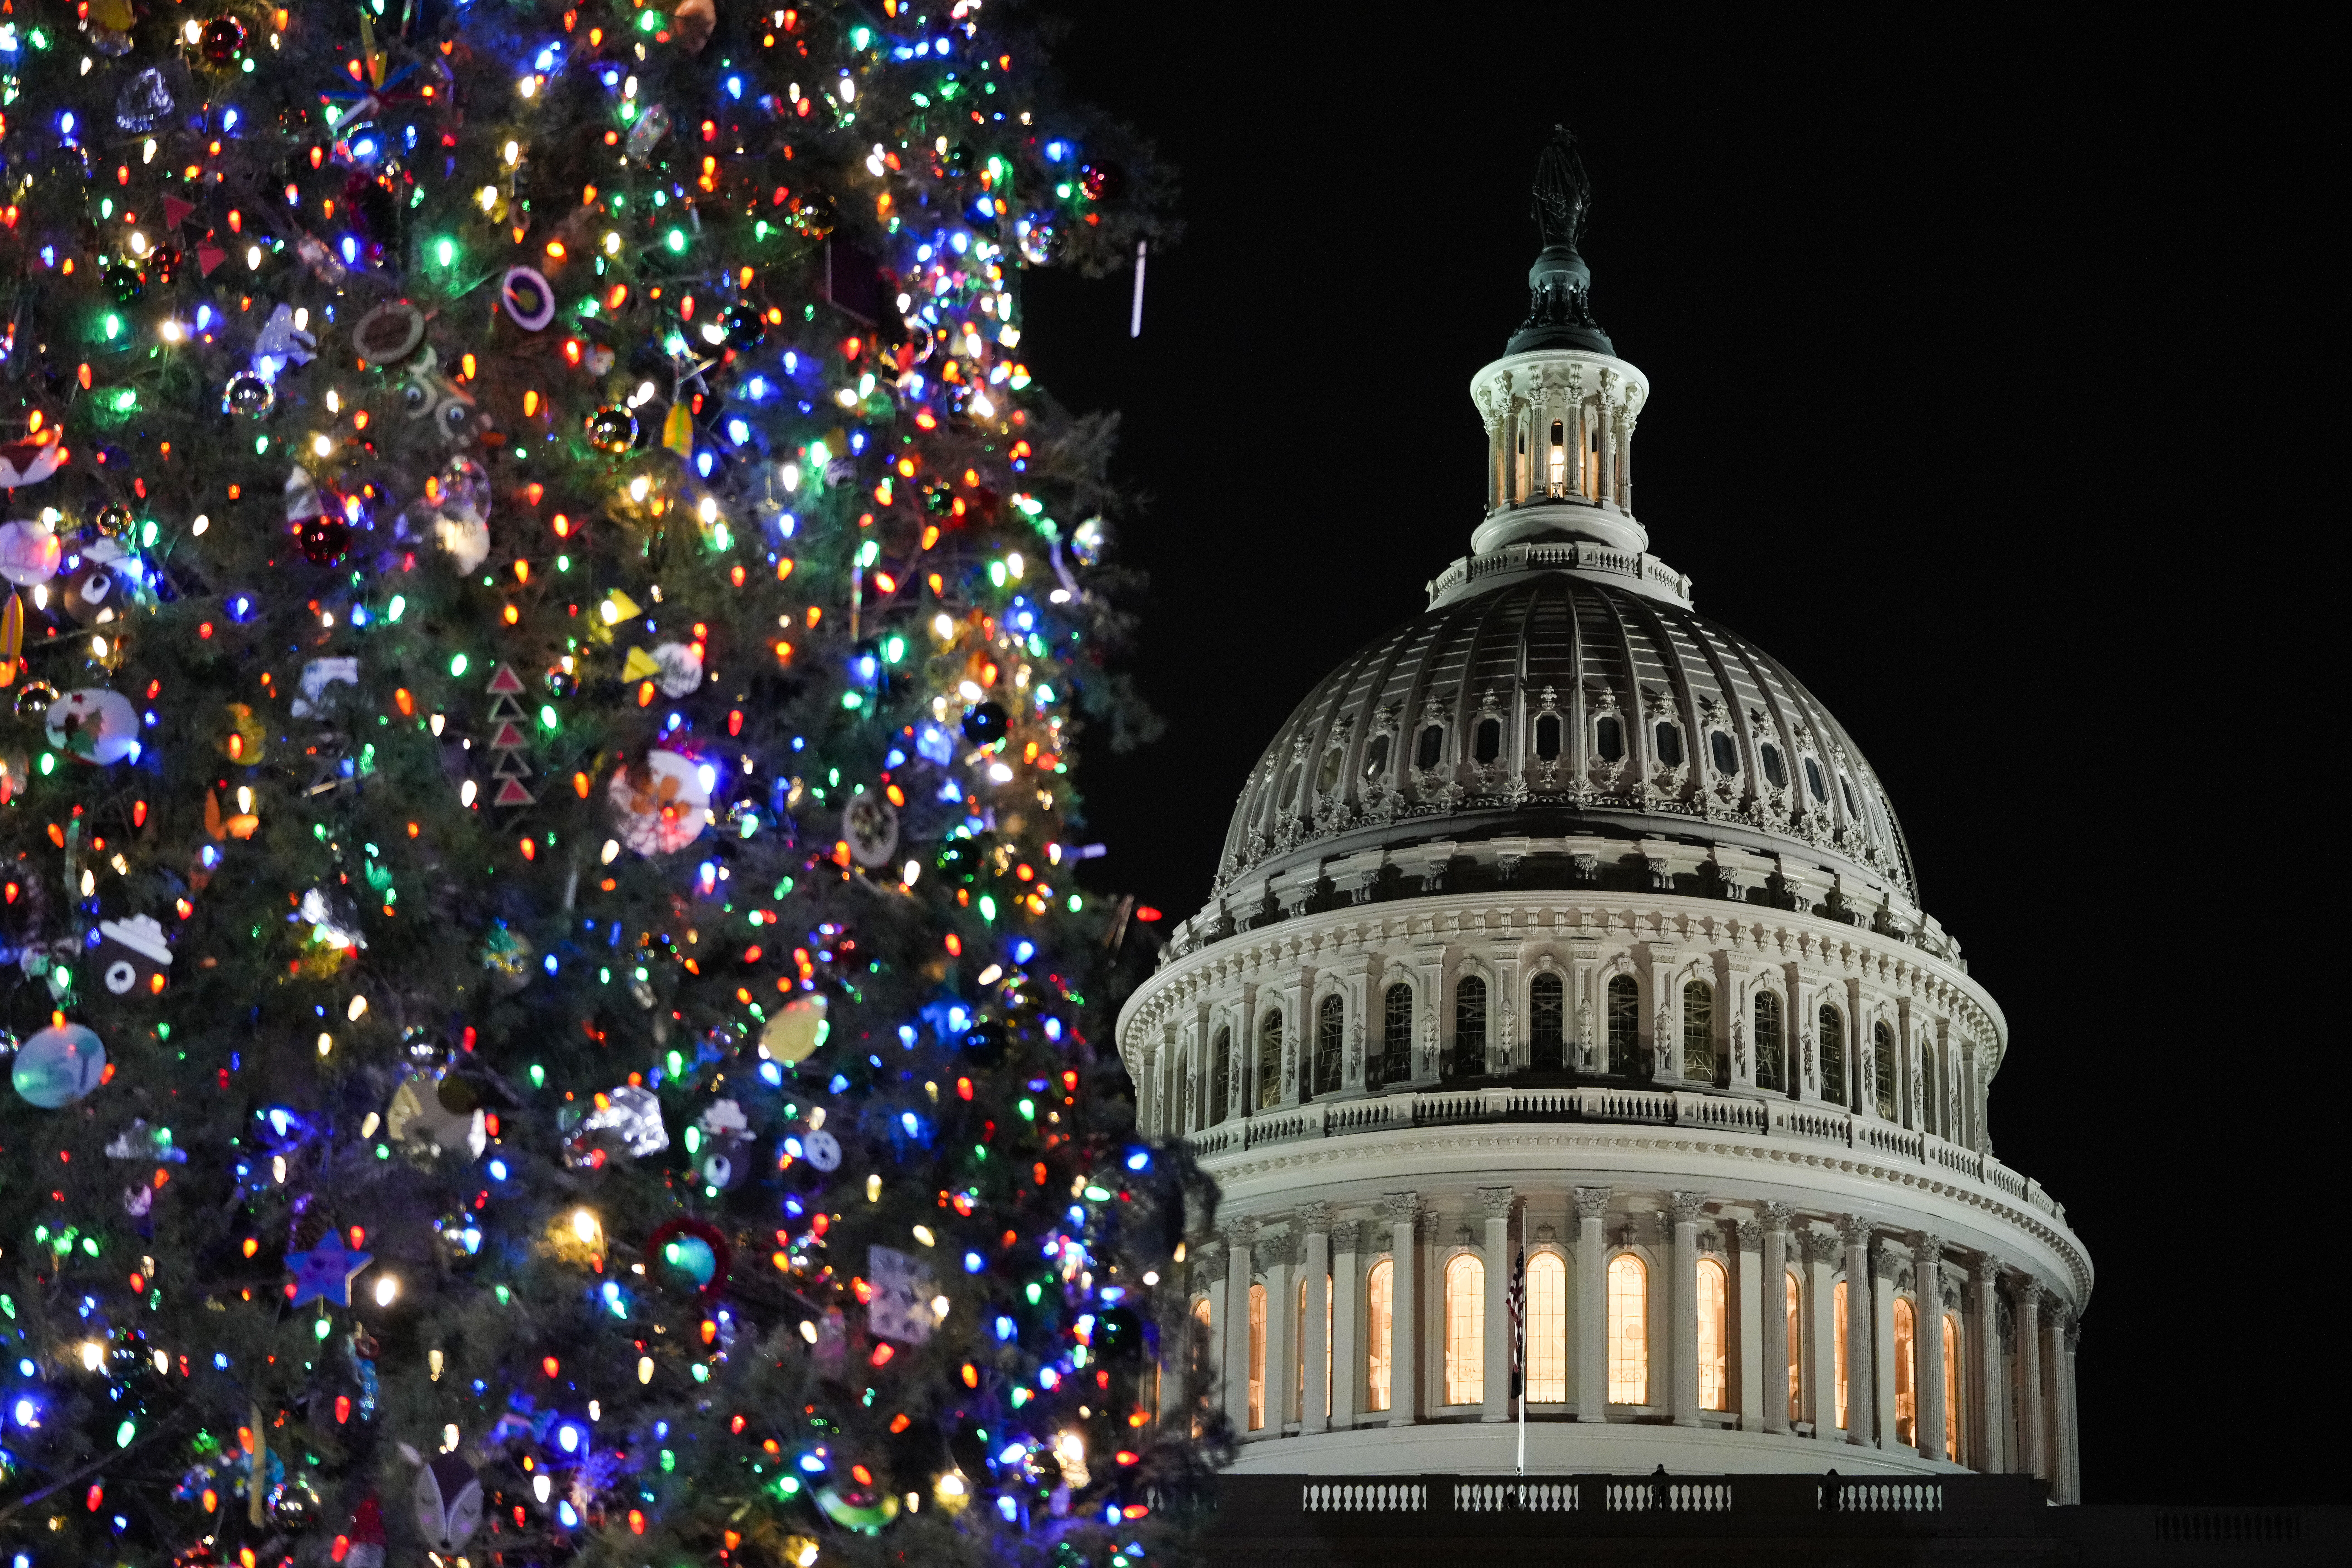 Christmas forecast: Cloudy and unusually mild for DC region